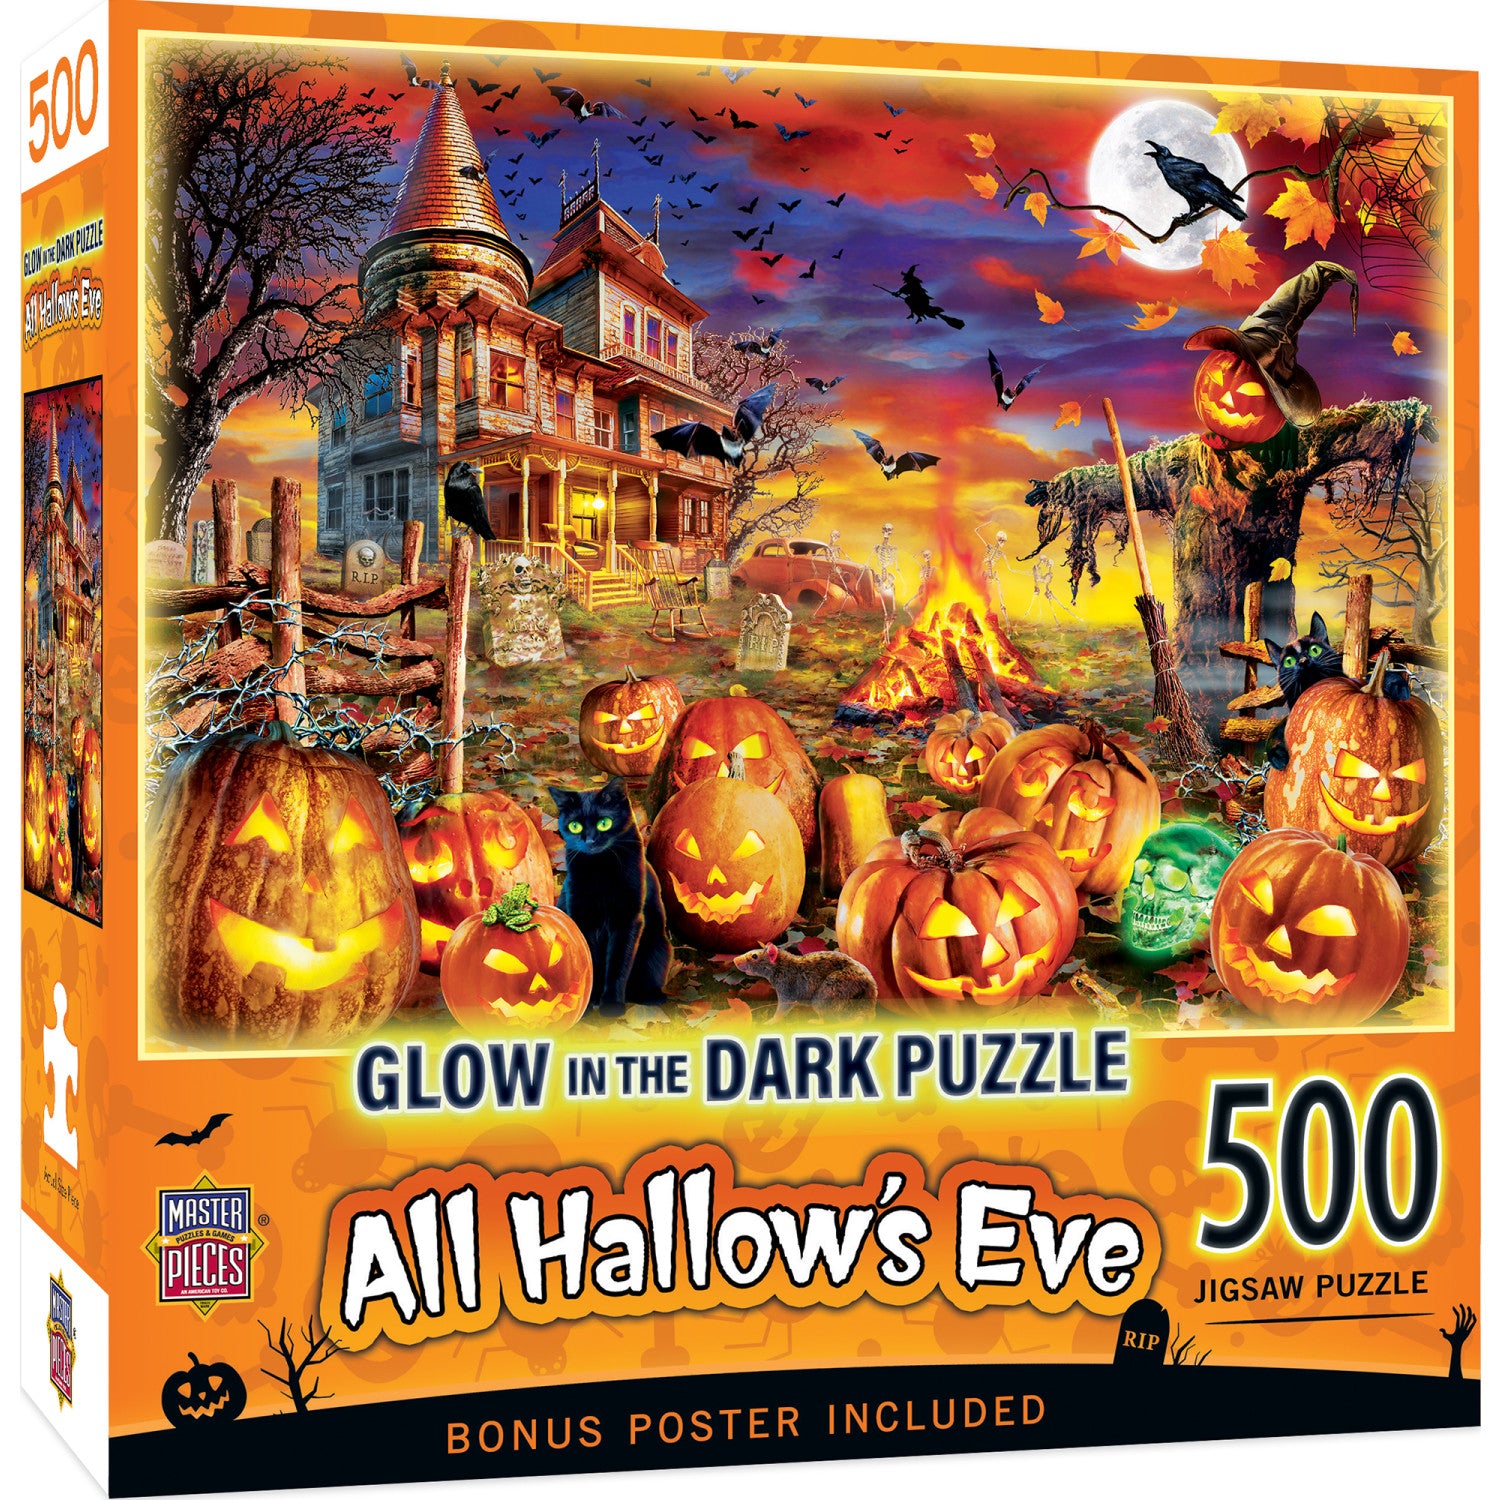 Glow in the Dark - All Hallow's Eve 500 Piece Jigsaw Puzzle